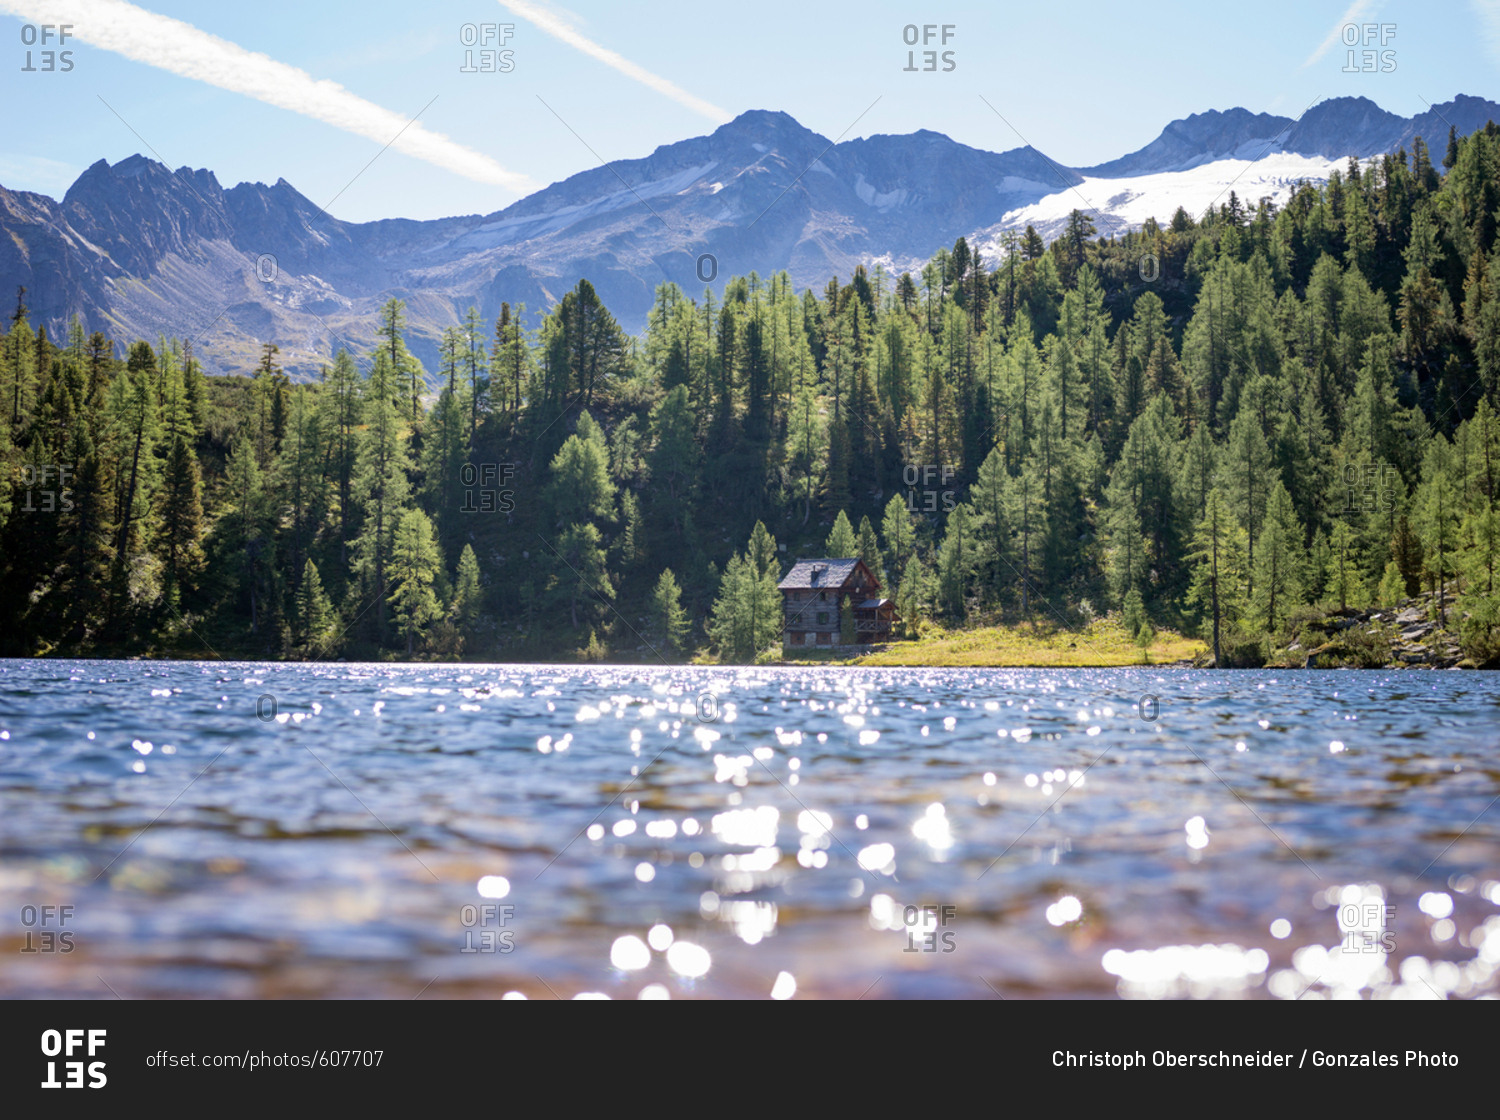 Austria, Lake Reedsee - August 30, 2015: Crystal clear water in the mountain lake Reedsee in Bad Gastein. The area is popular for hiking, picnic and fishing